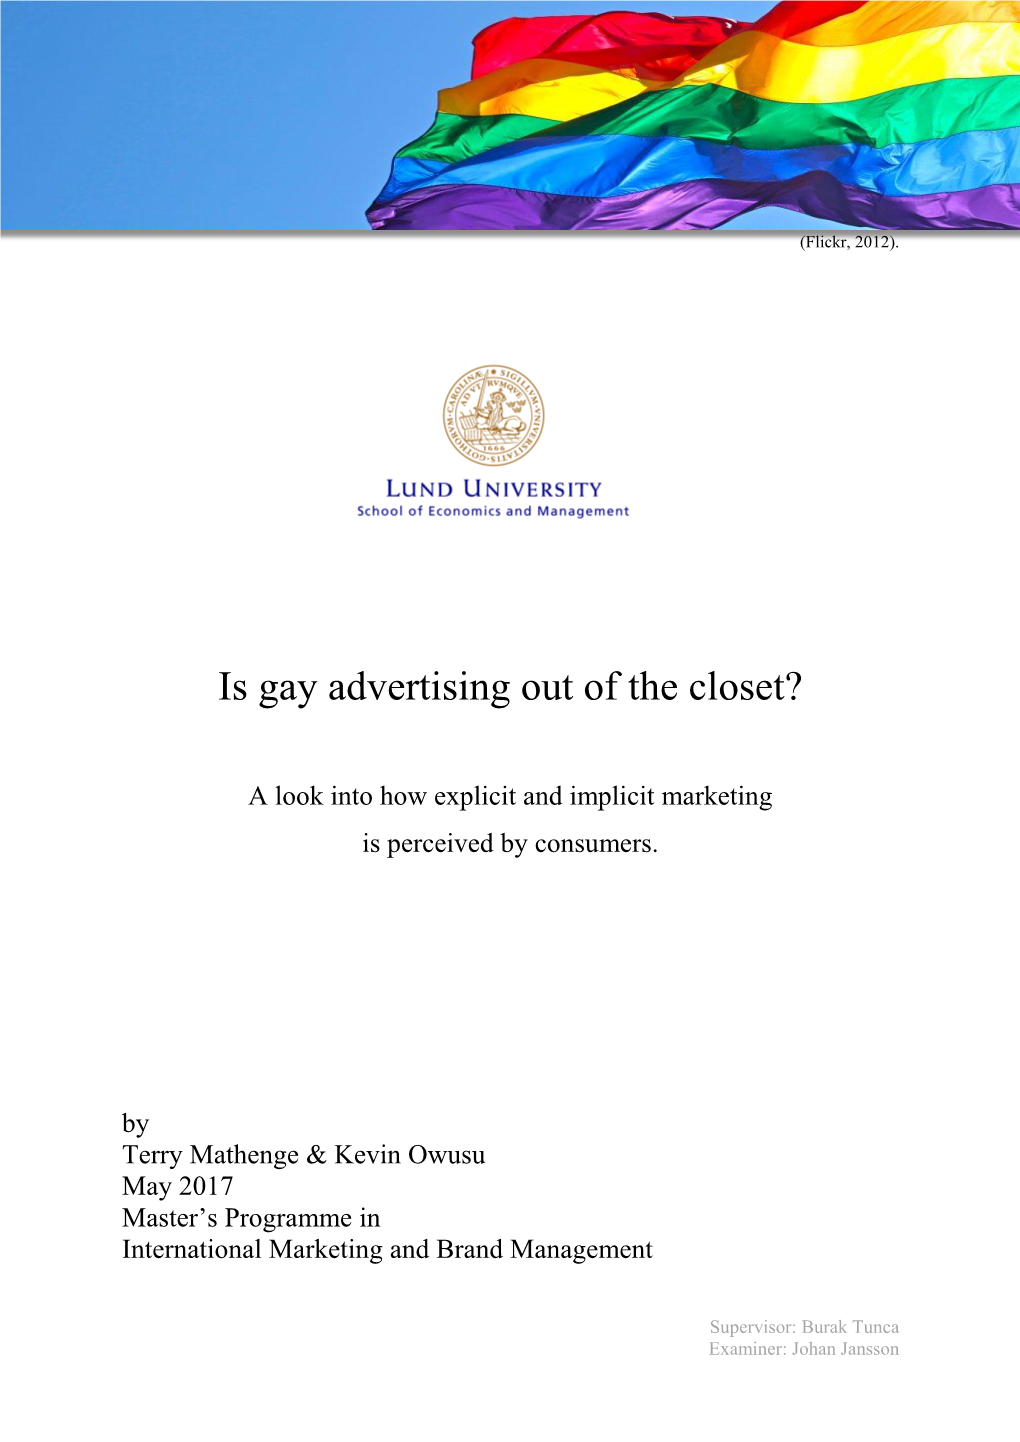 Is Gay Advertising out of the Closet?